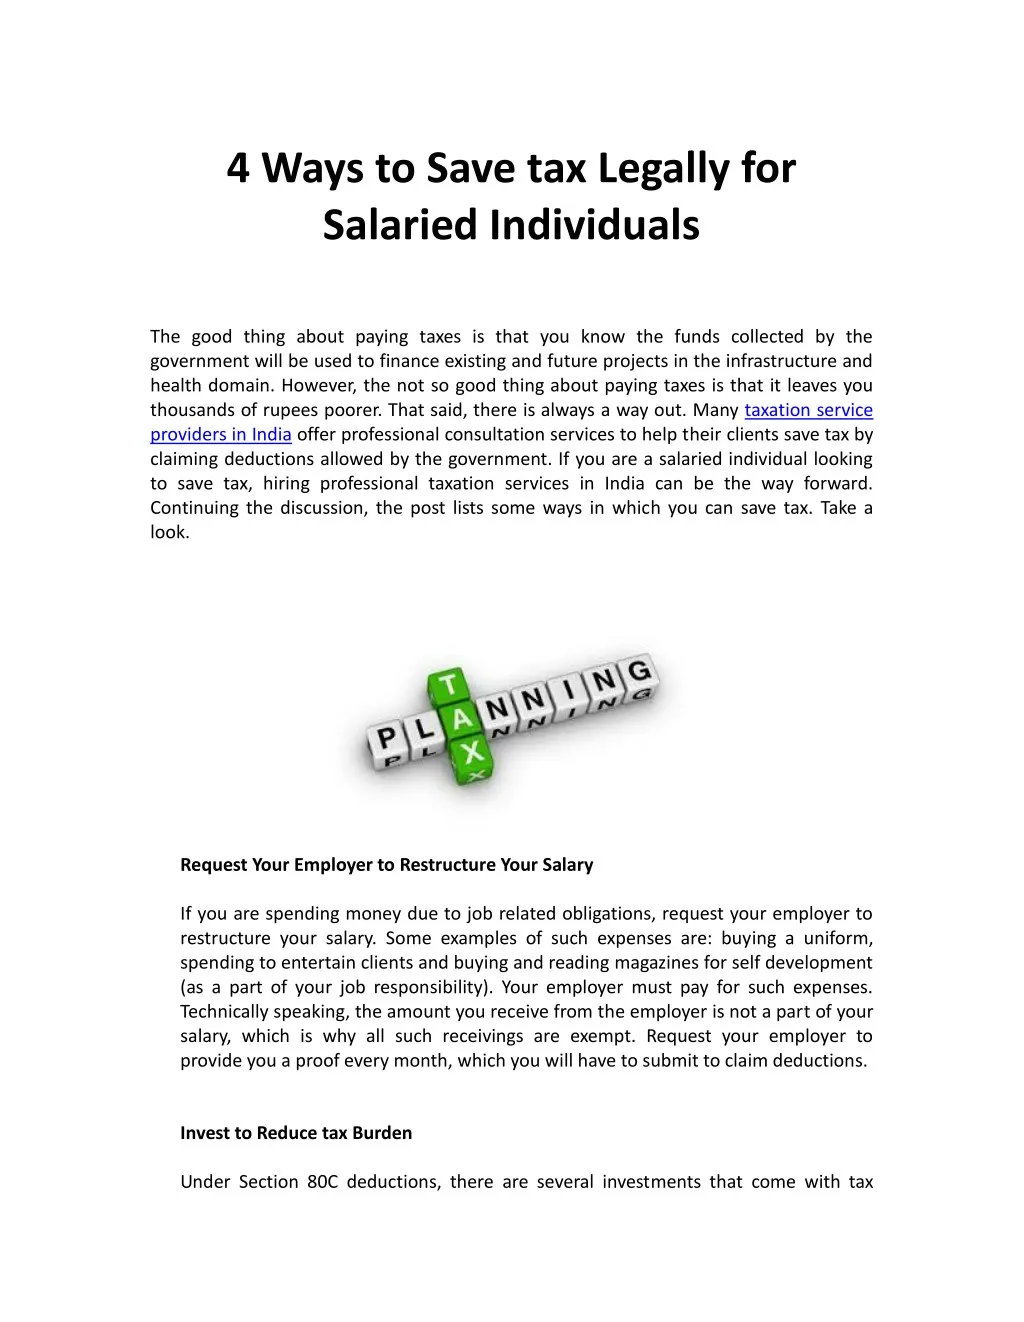 4 ways to save tax legally for salaried